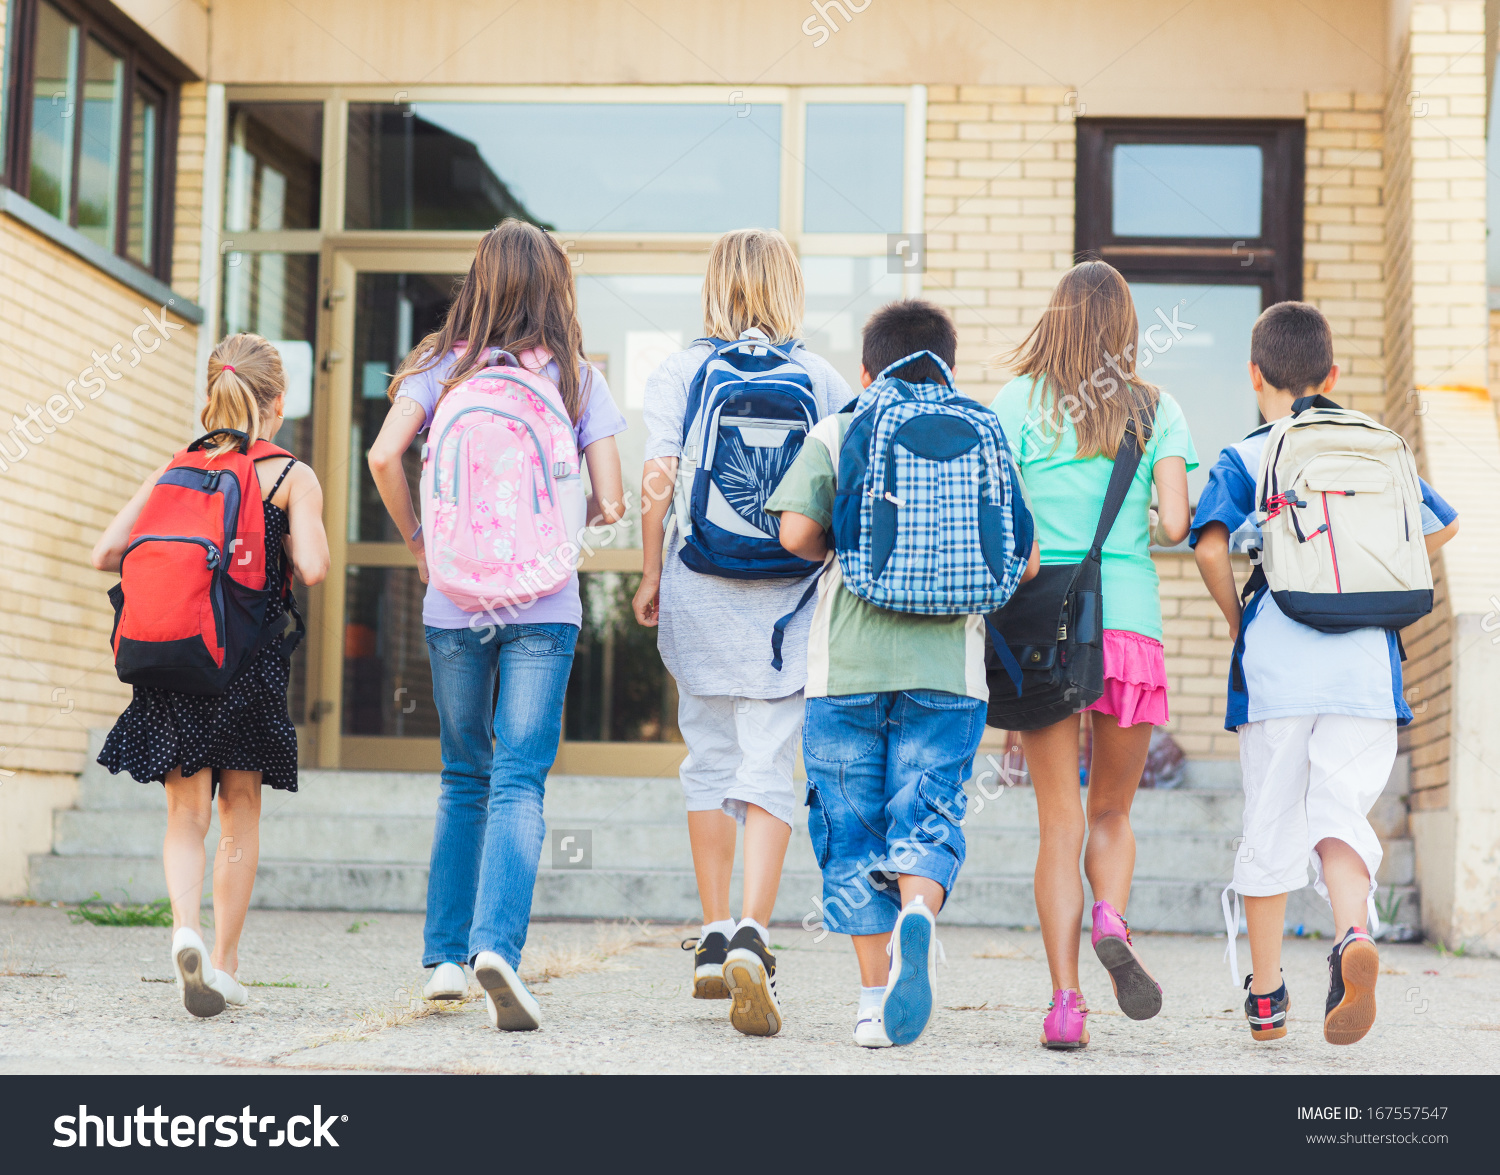 stock-photo-group-of-kids-going-to-school-together-167557547